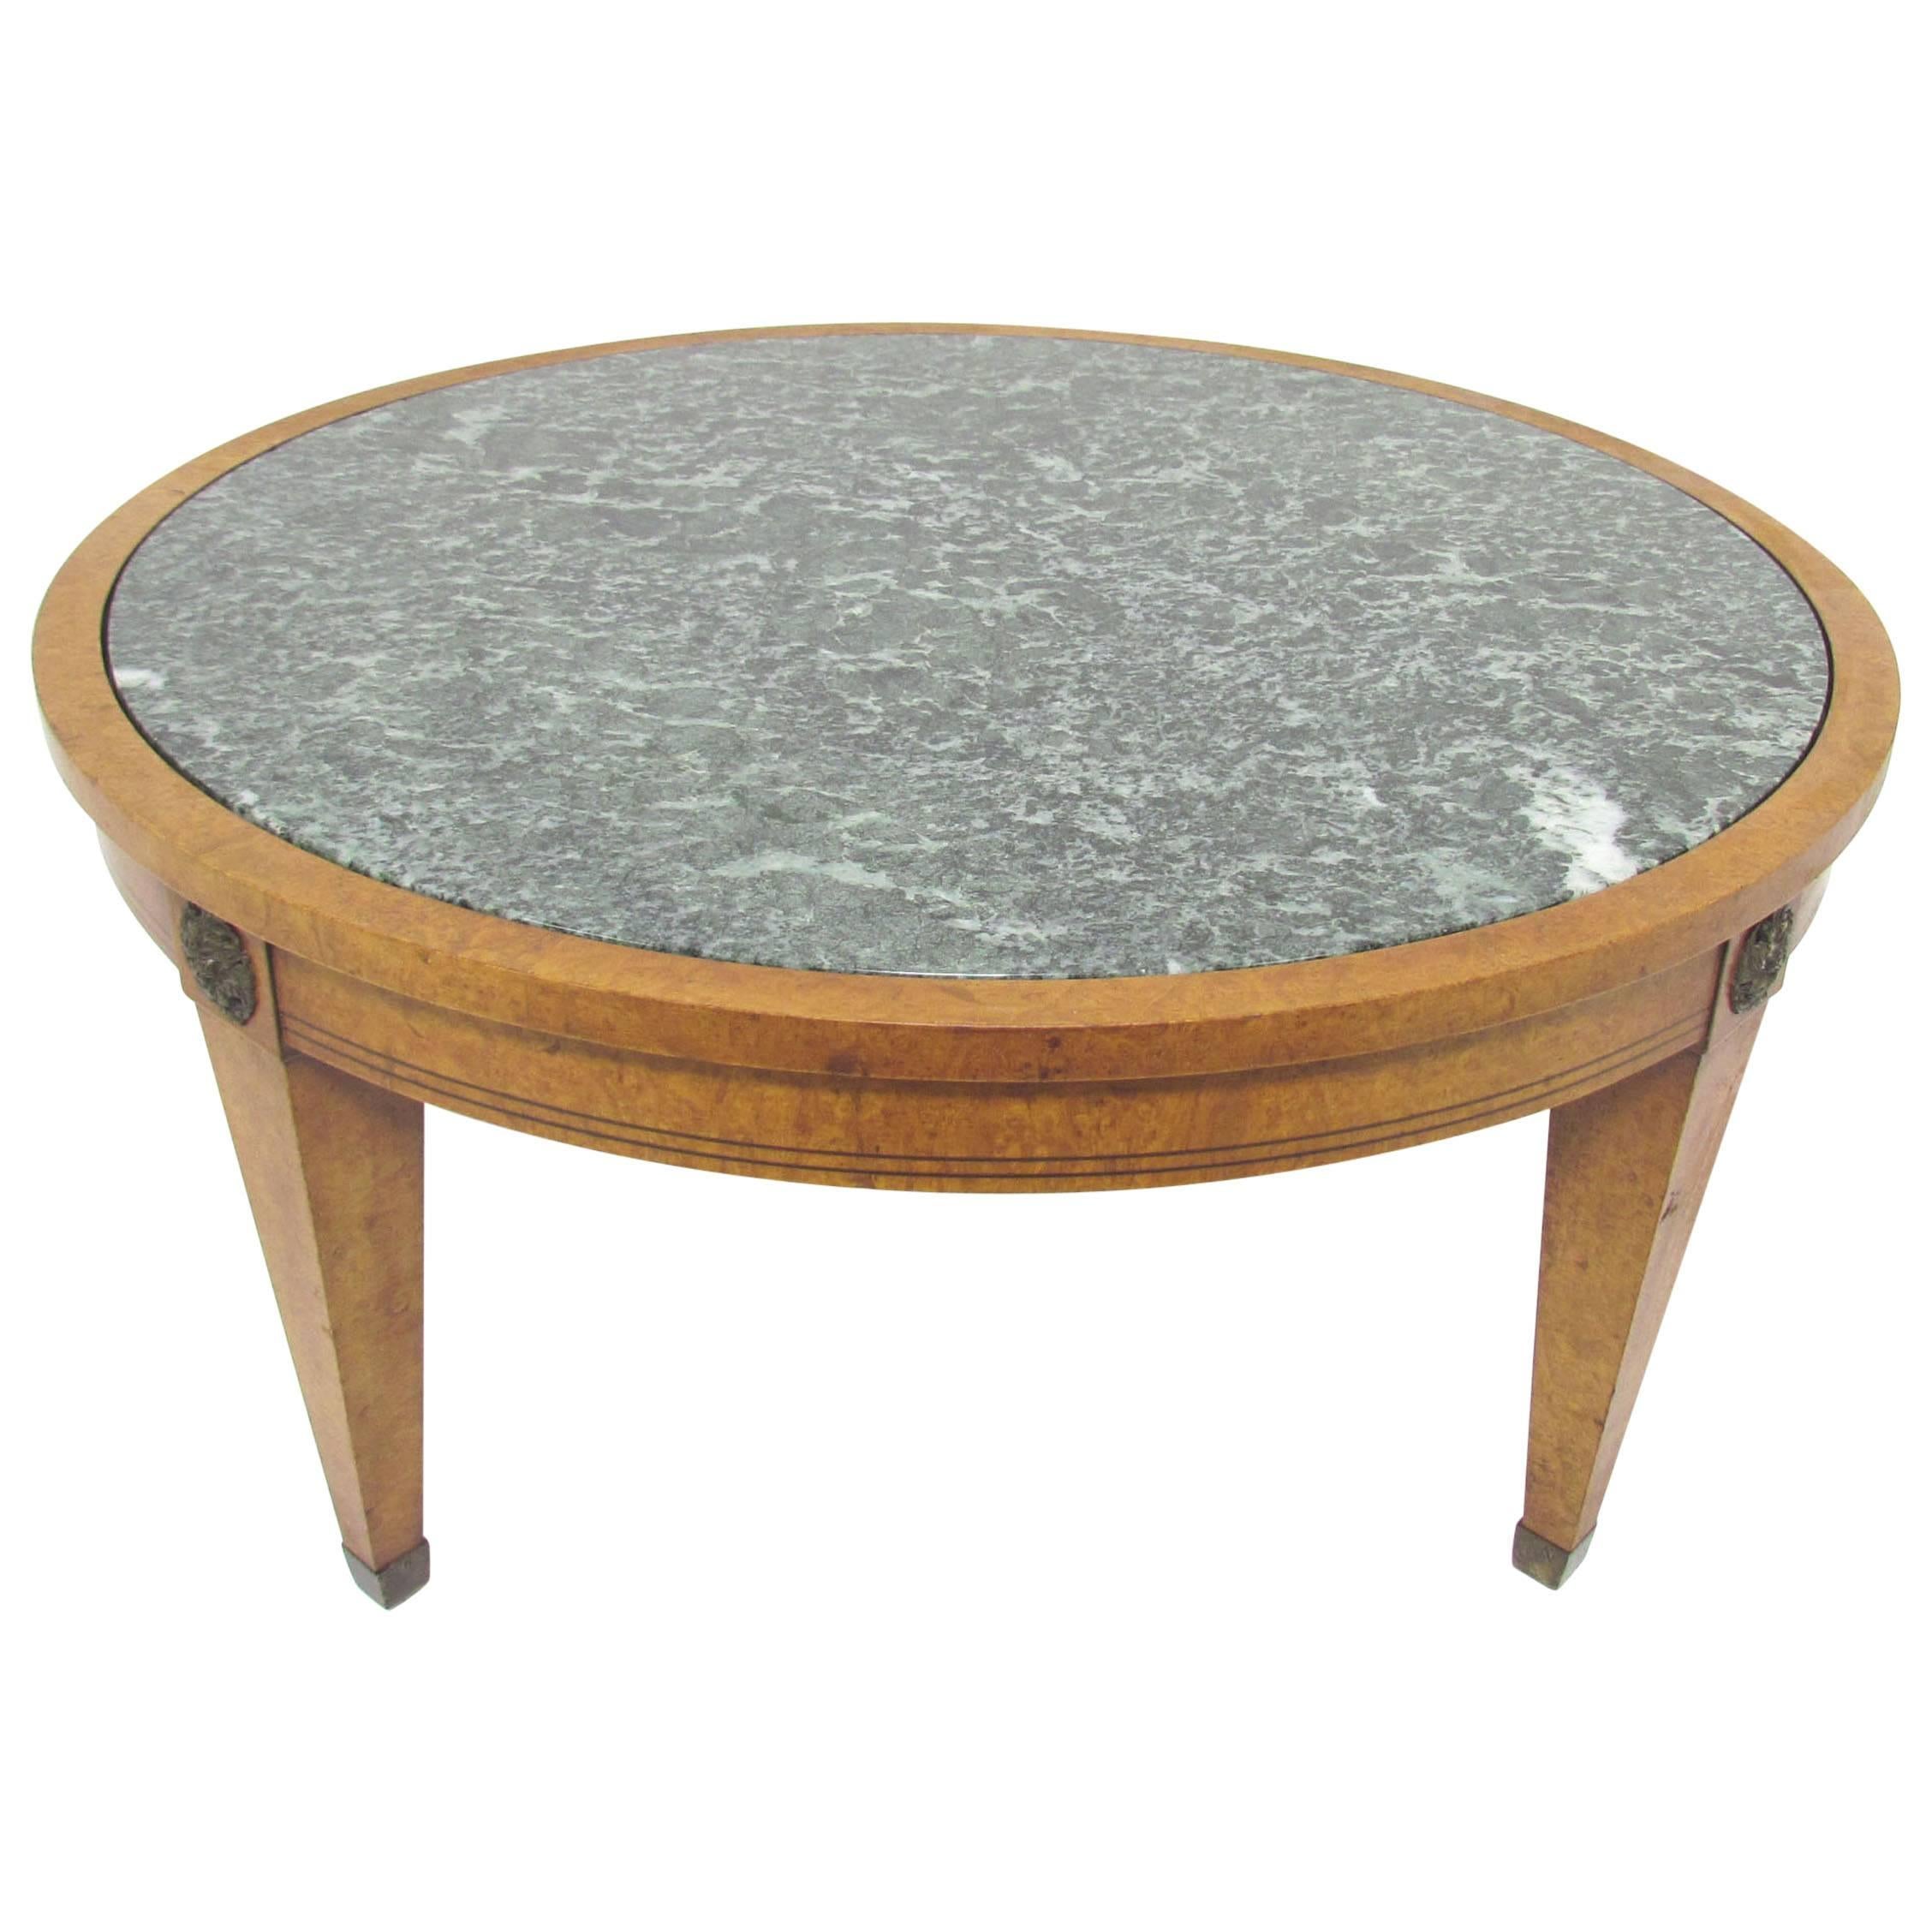 Mid-Century Neoclassical Coffee Table by Charak, Dated 1952